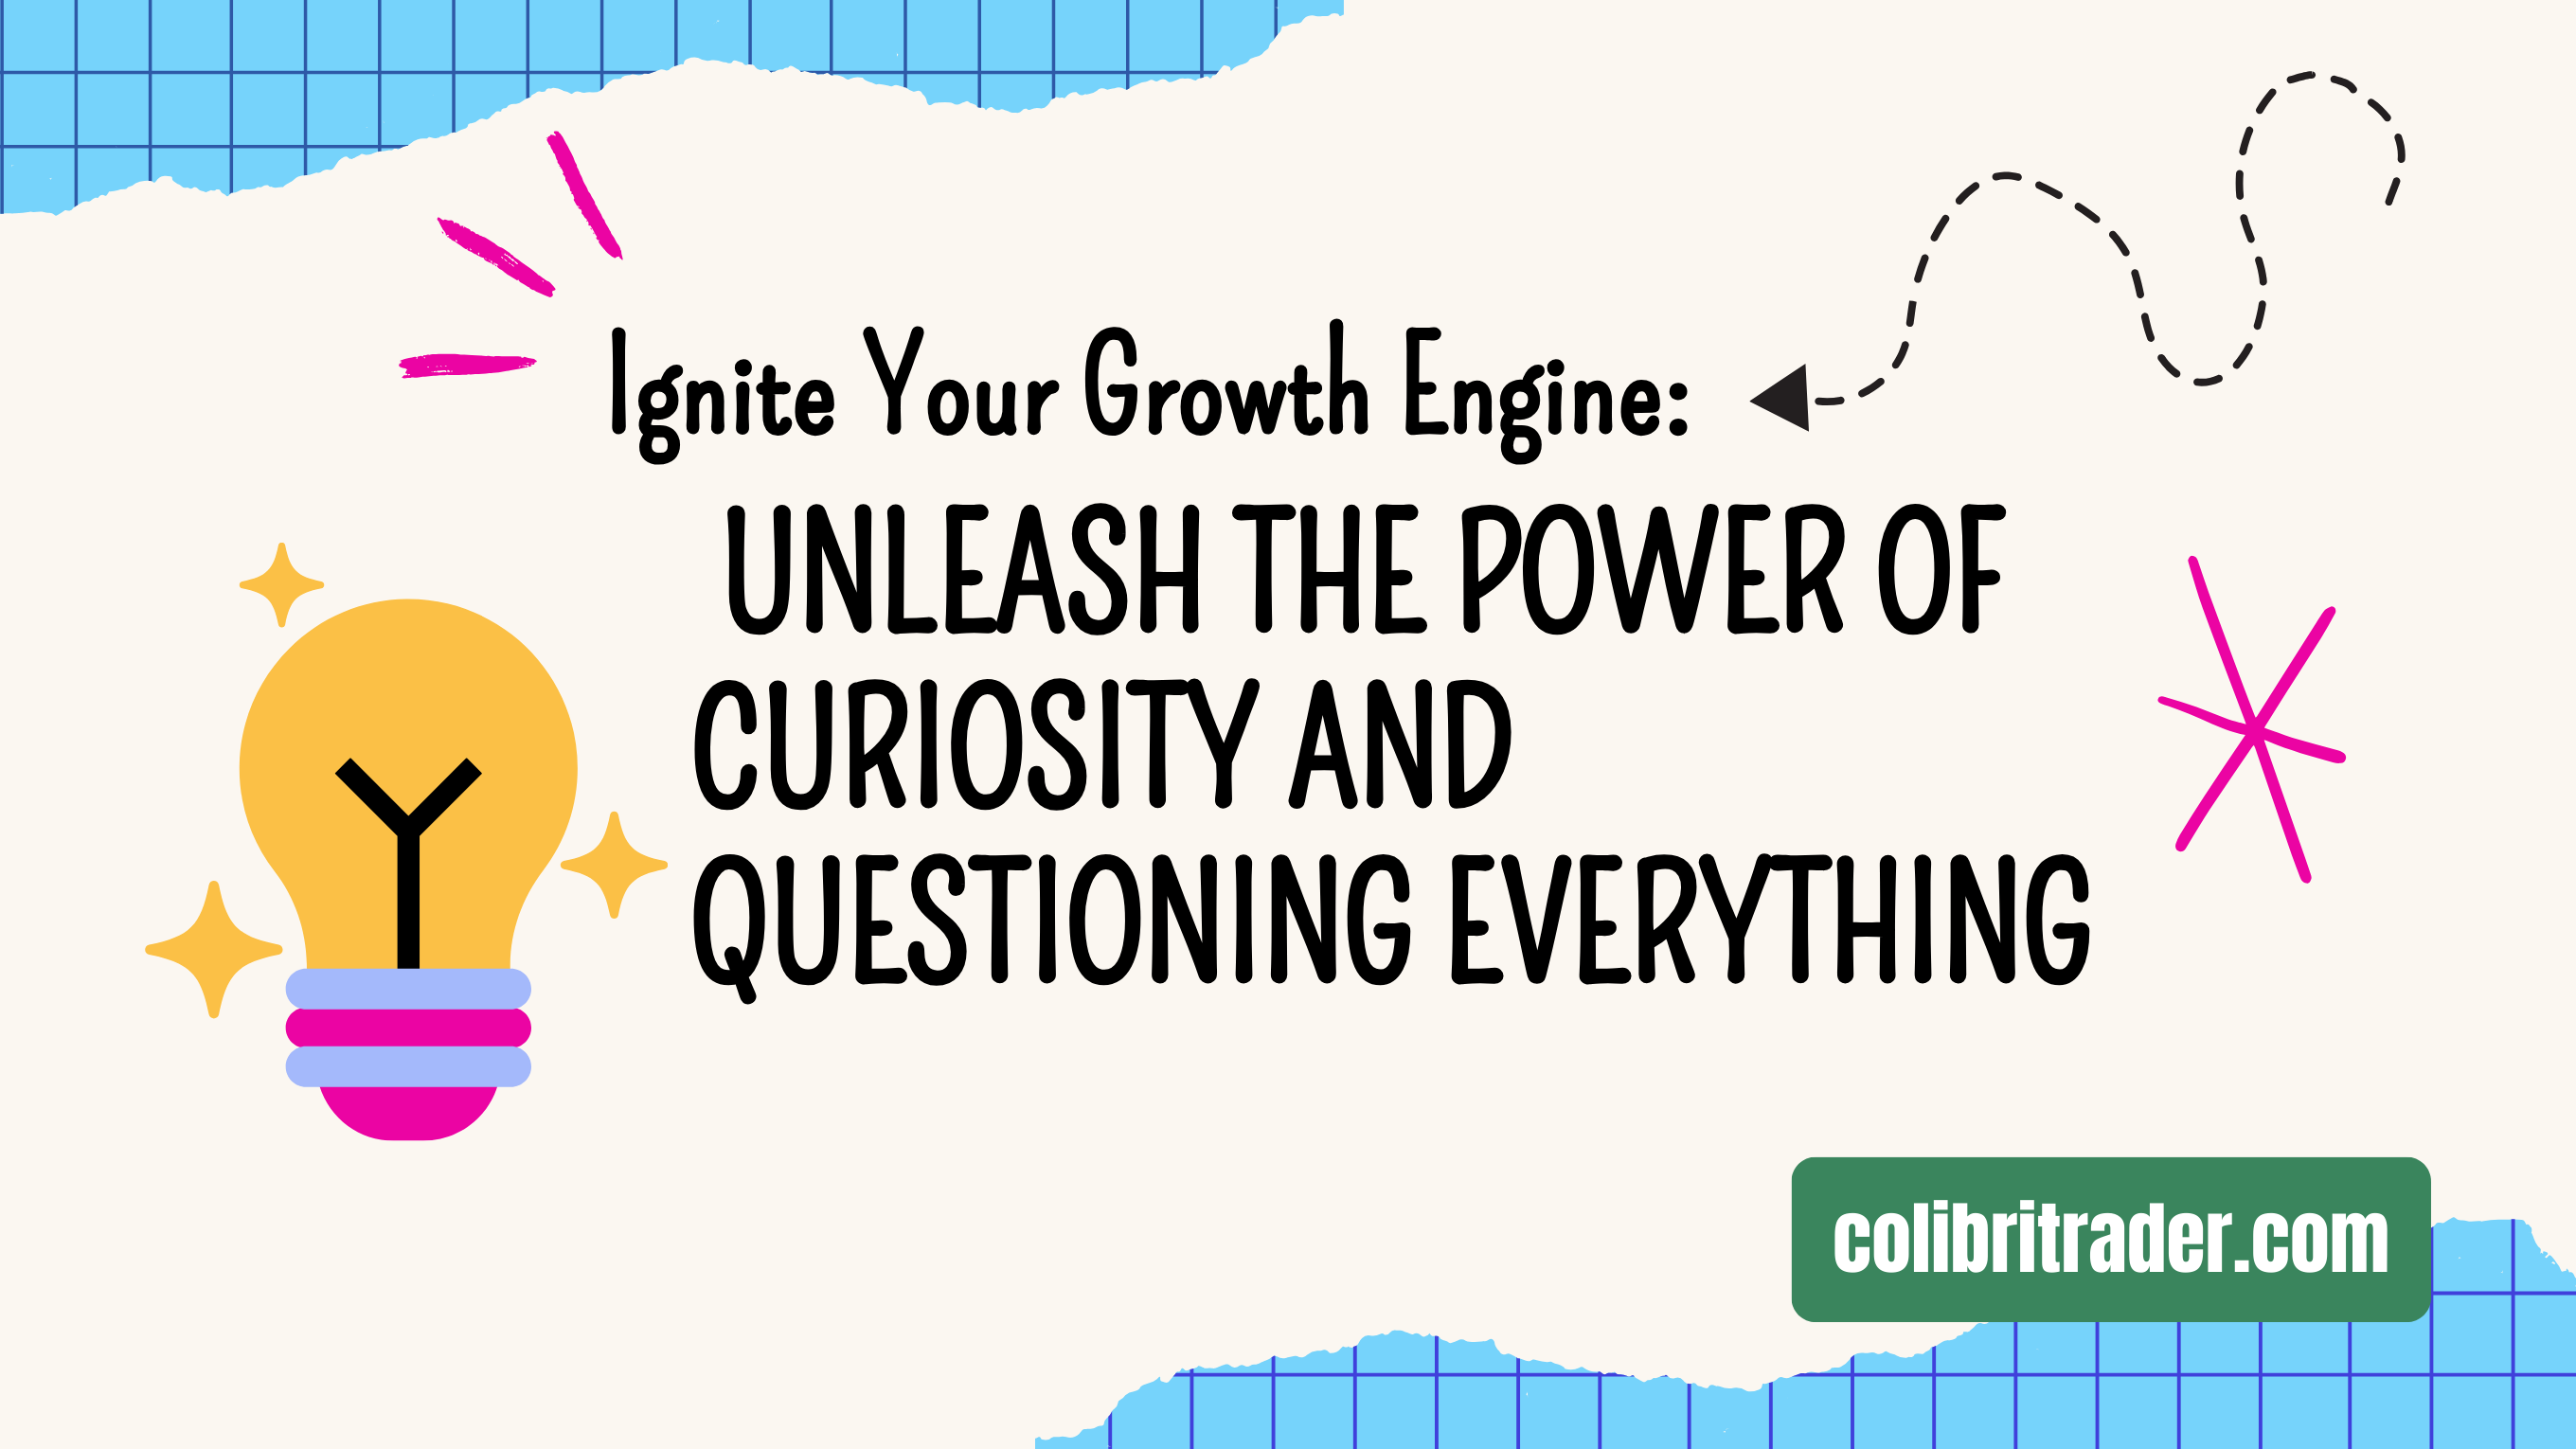 Ignite Your Growth Engine: Unleash the Power of Curiosity and Questioning Everything